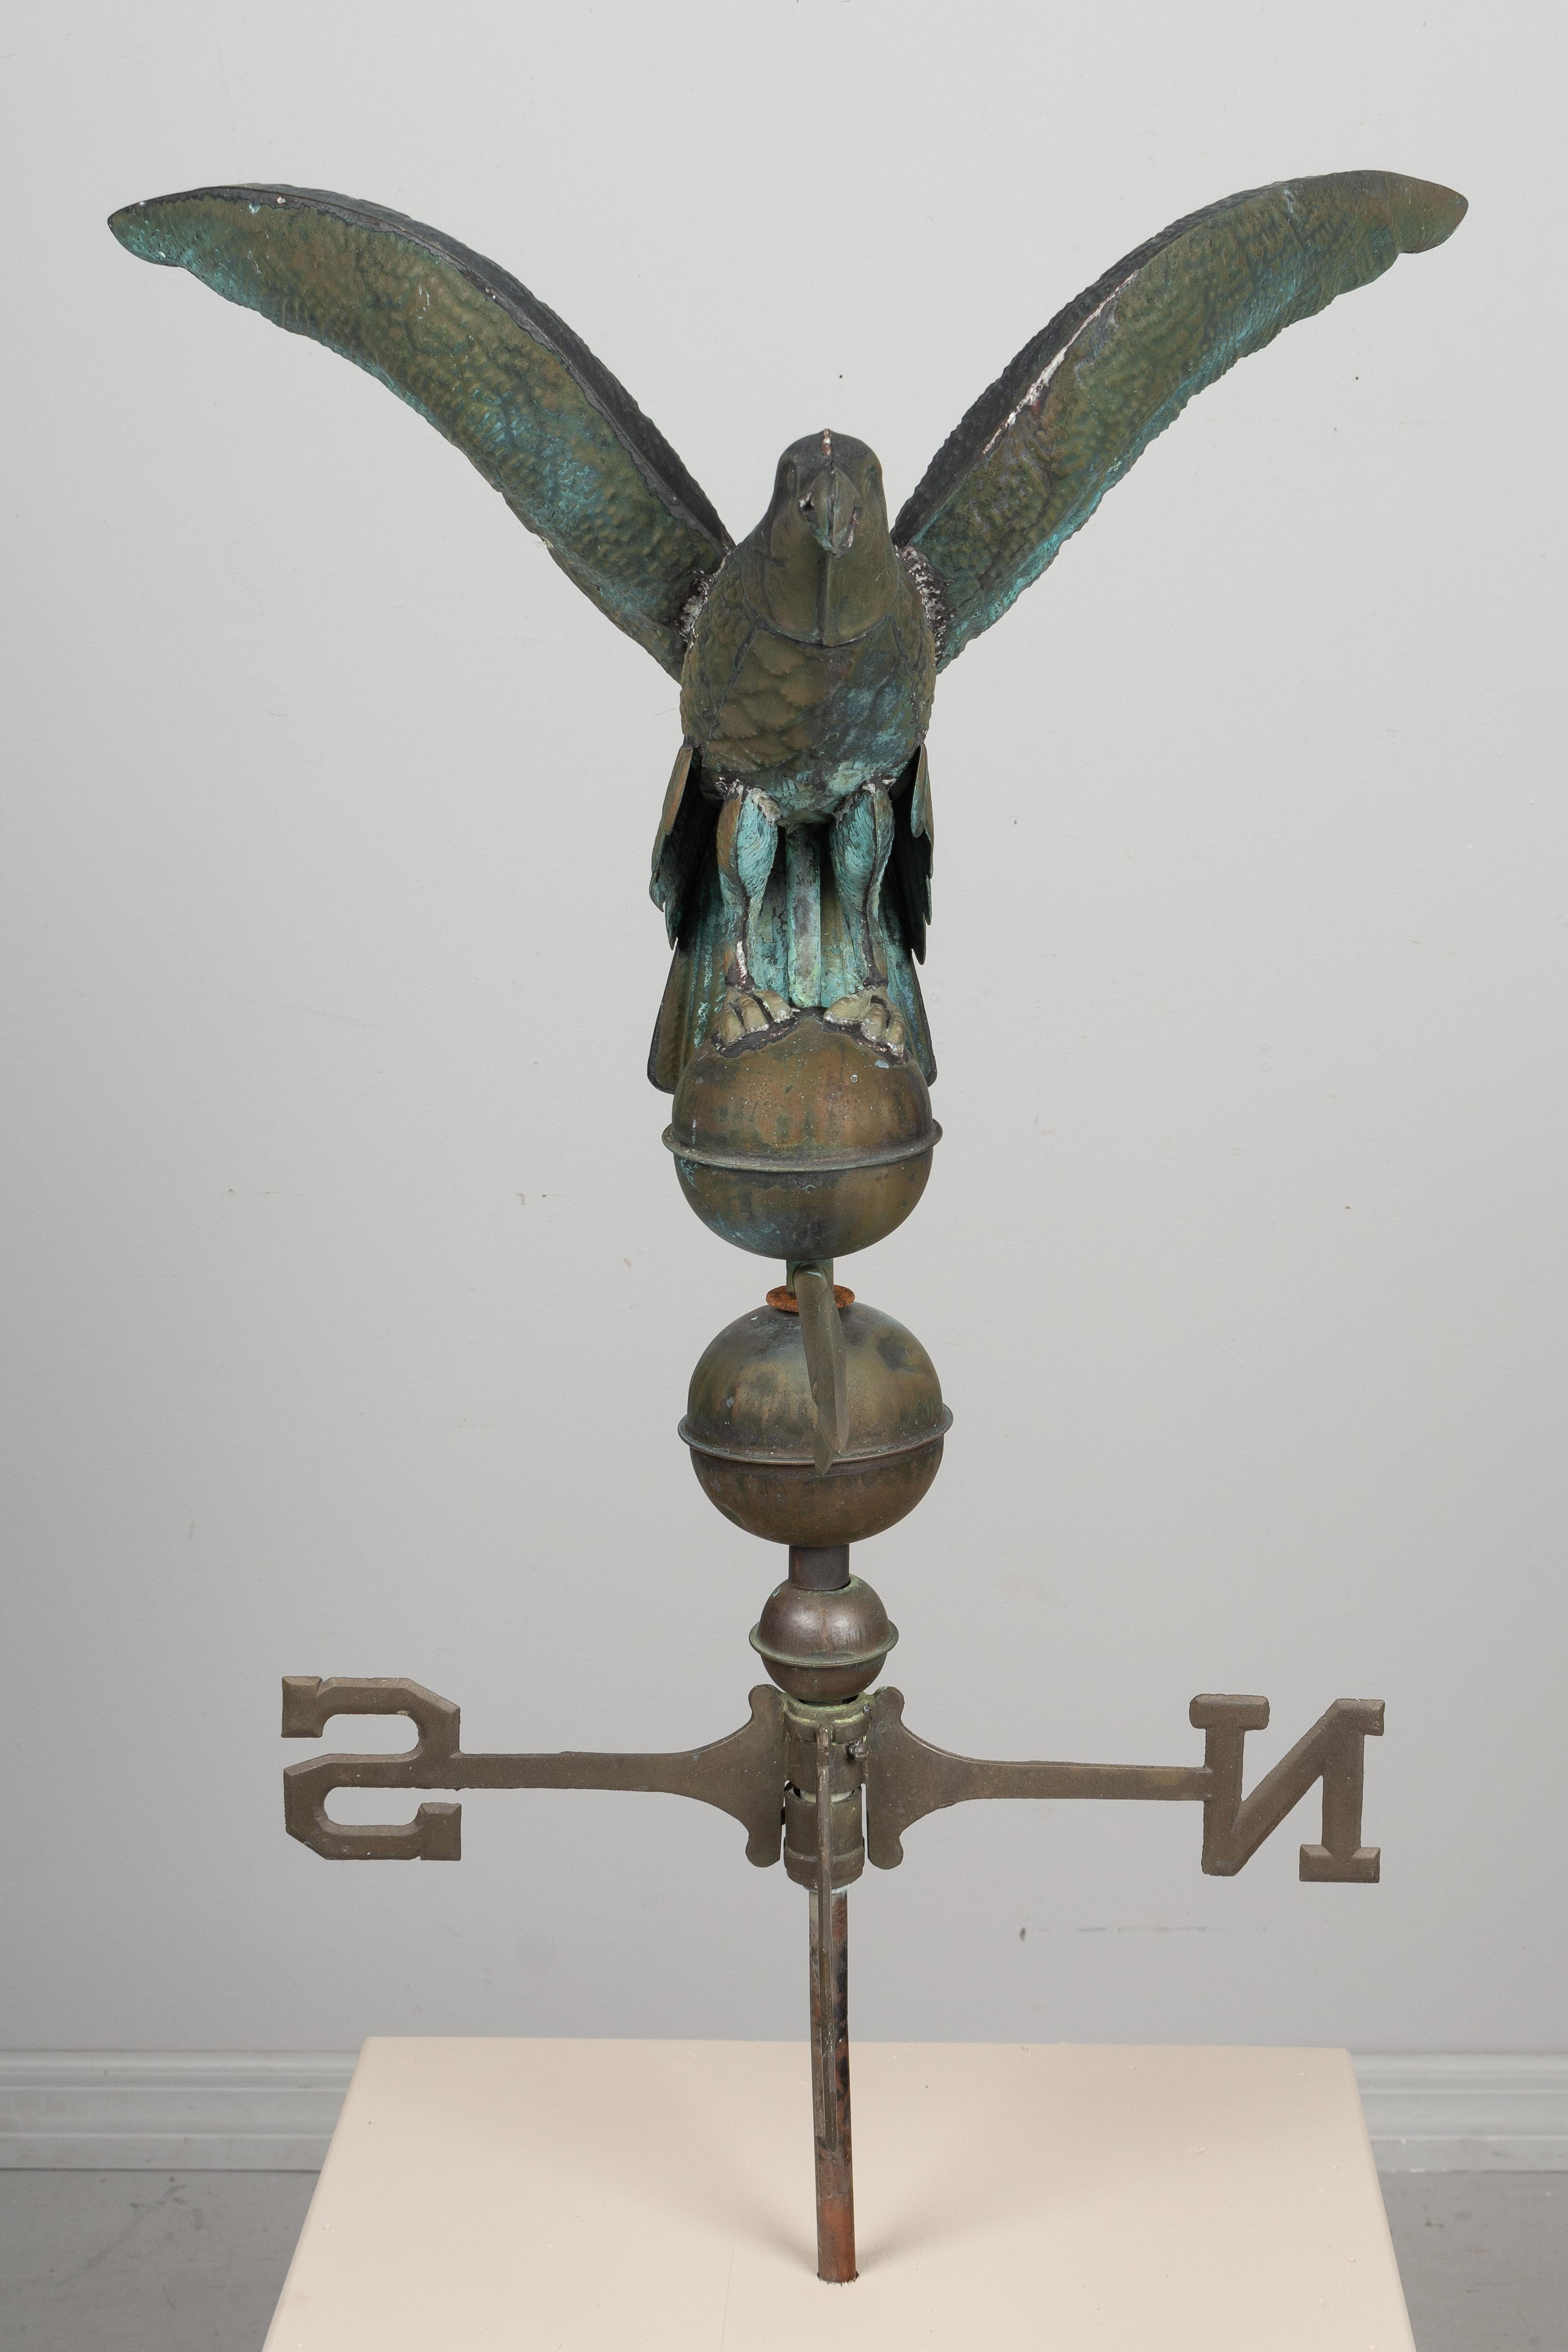 A vintage American weathervane with an eagle perched an a globe, wings outstretched. The eagle and globes are made of welded copper and have a nice weathered verdigris patina. The directionals are solid brass and are 18